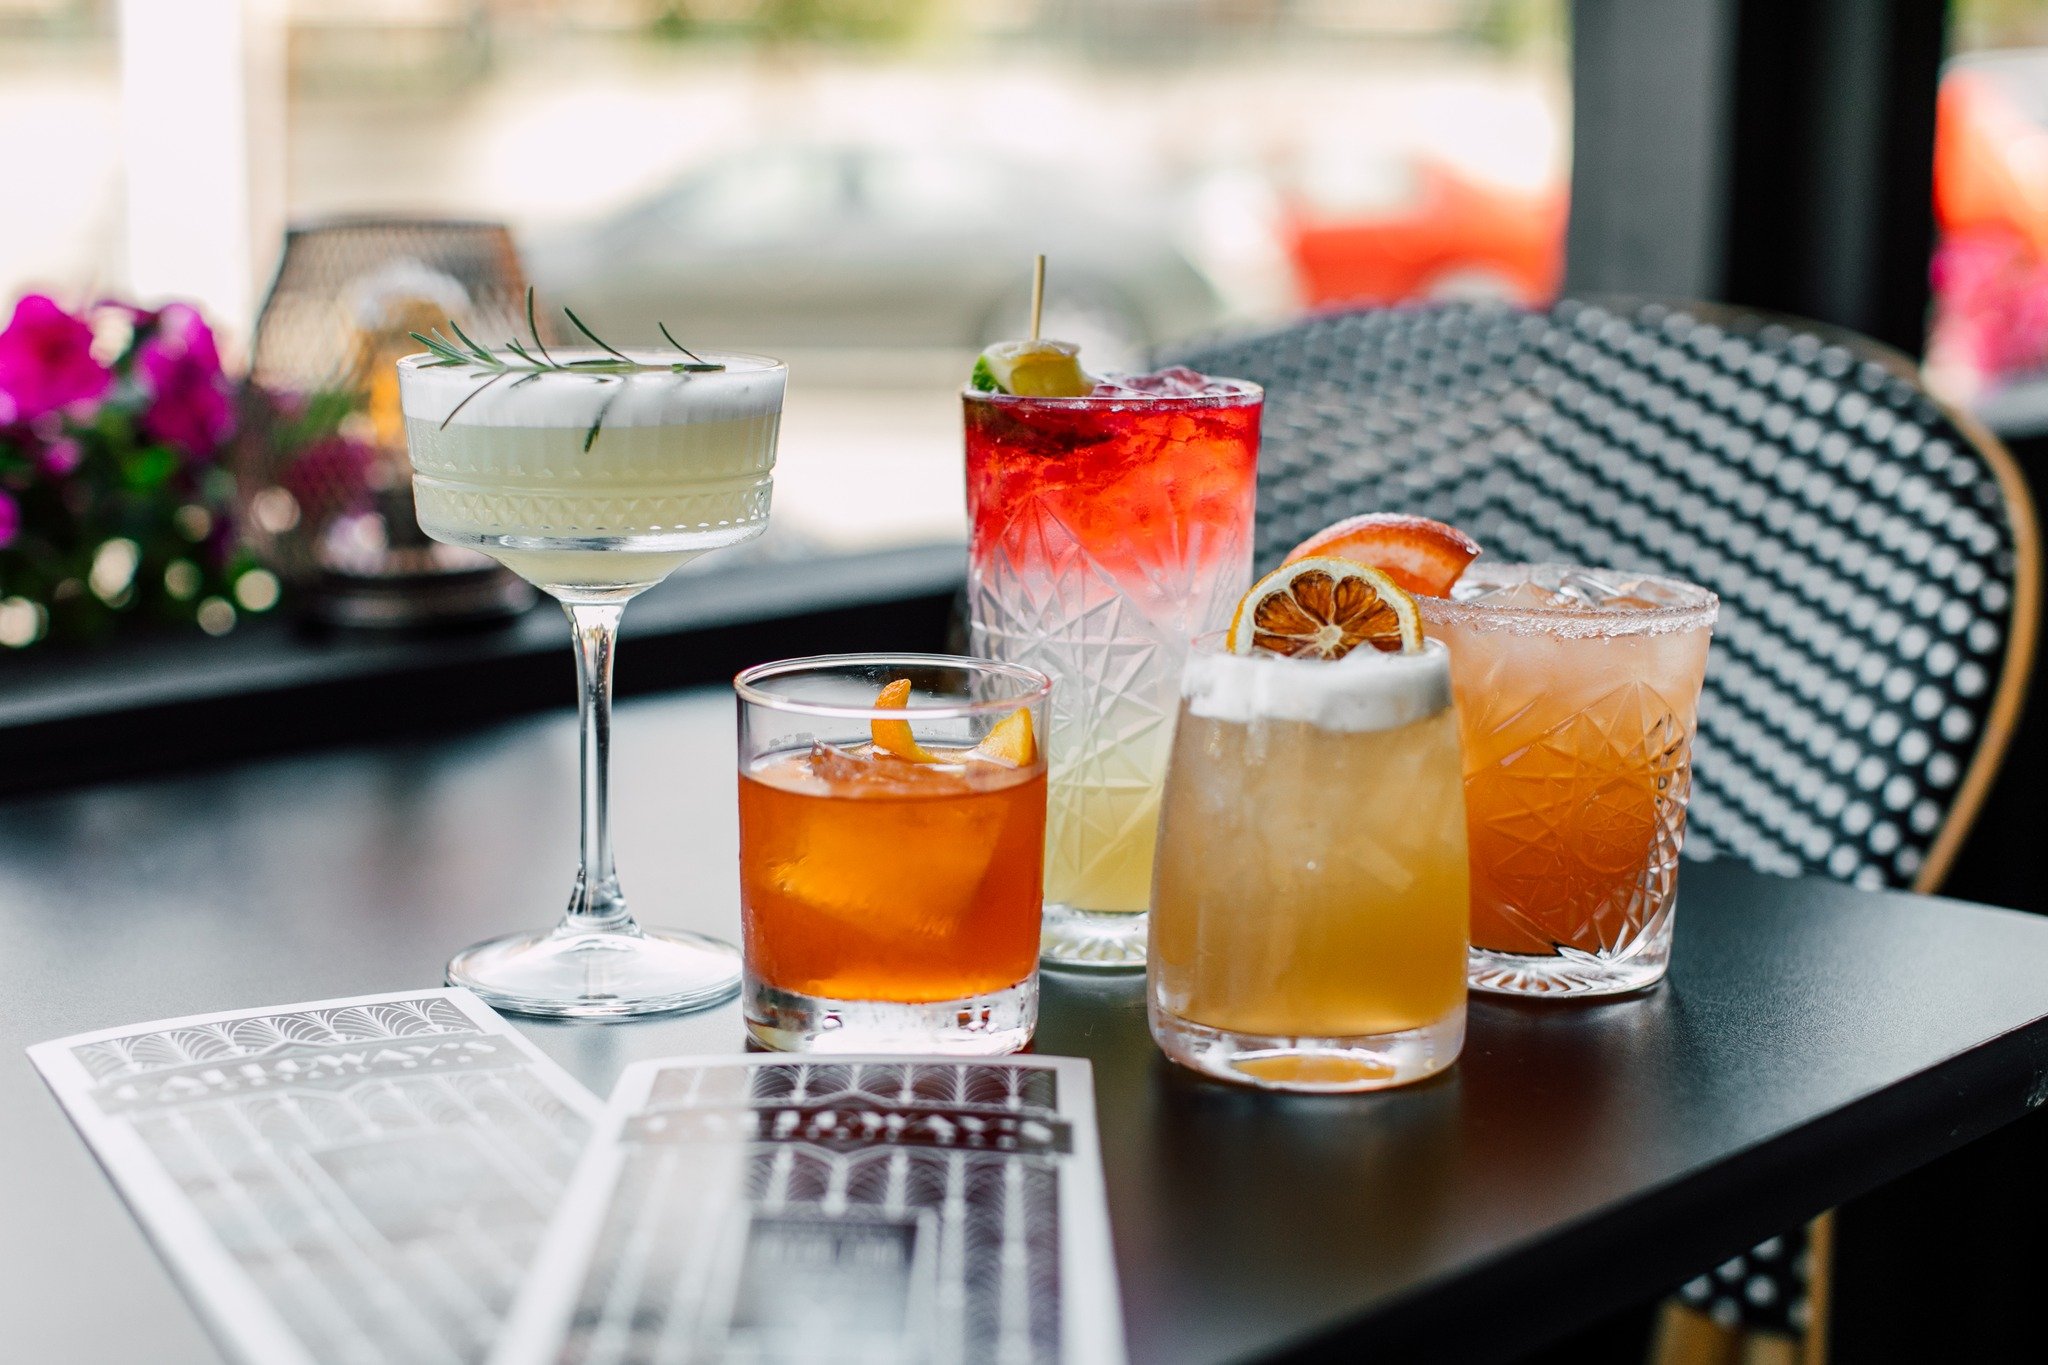 What better way to celebrate National Beverage Day than by visiting Galloway's to enjoy a refreshing cocktail, glass of wine or beer, or a delicious non-alcoholic concoction! 🍹🍷🥃🍺

Stop by today to enjoy a sip in celebration.